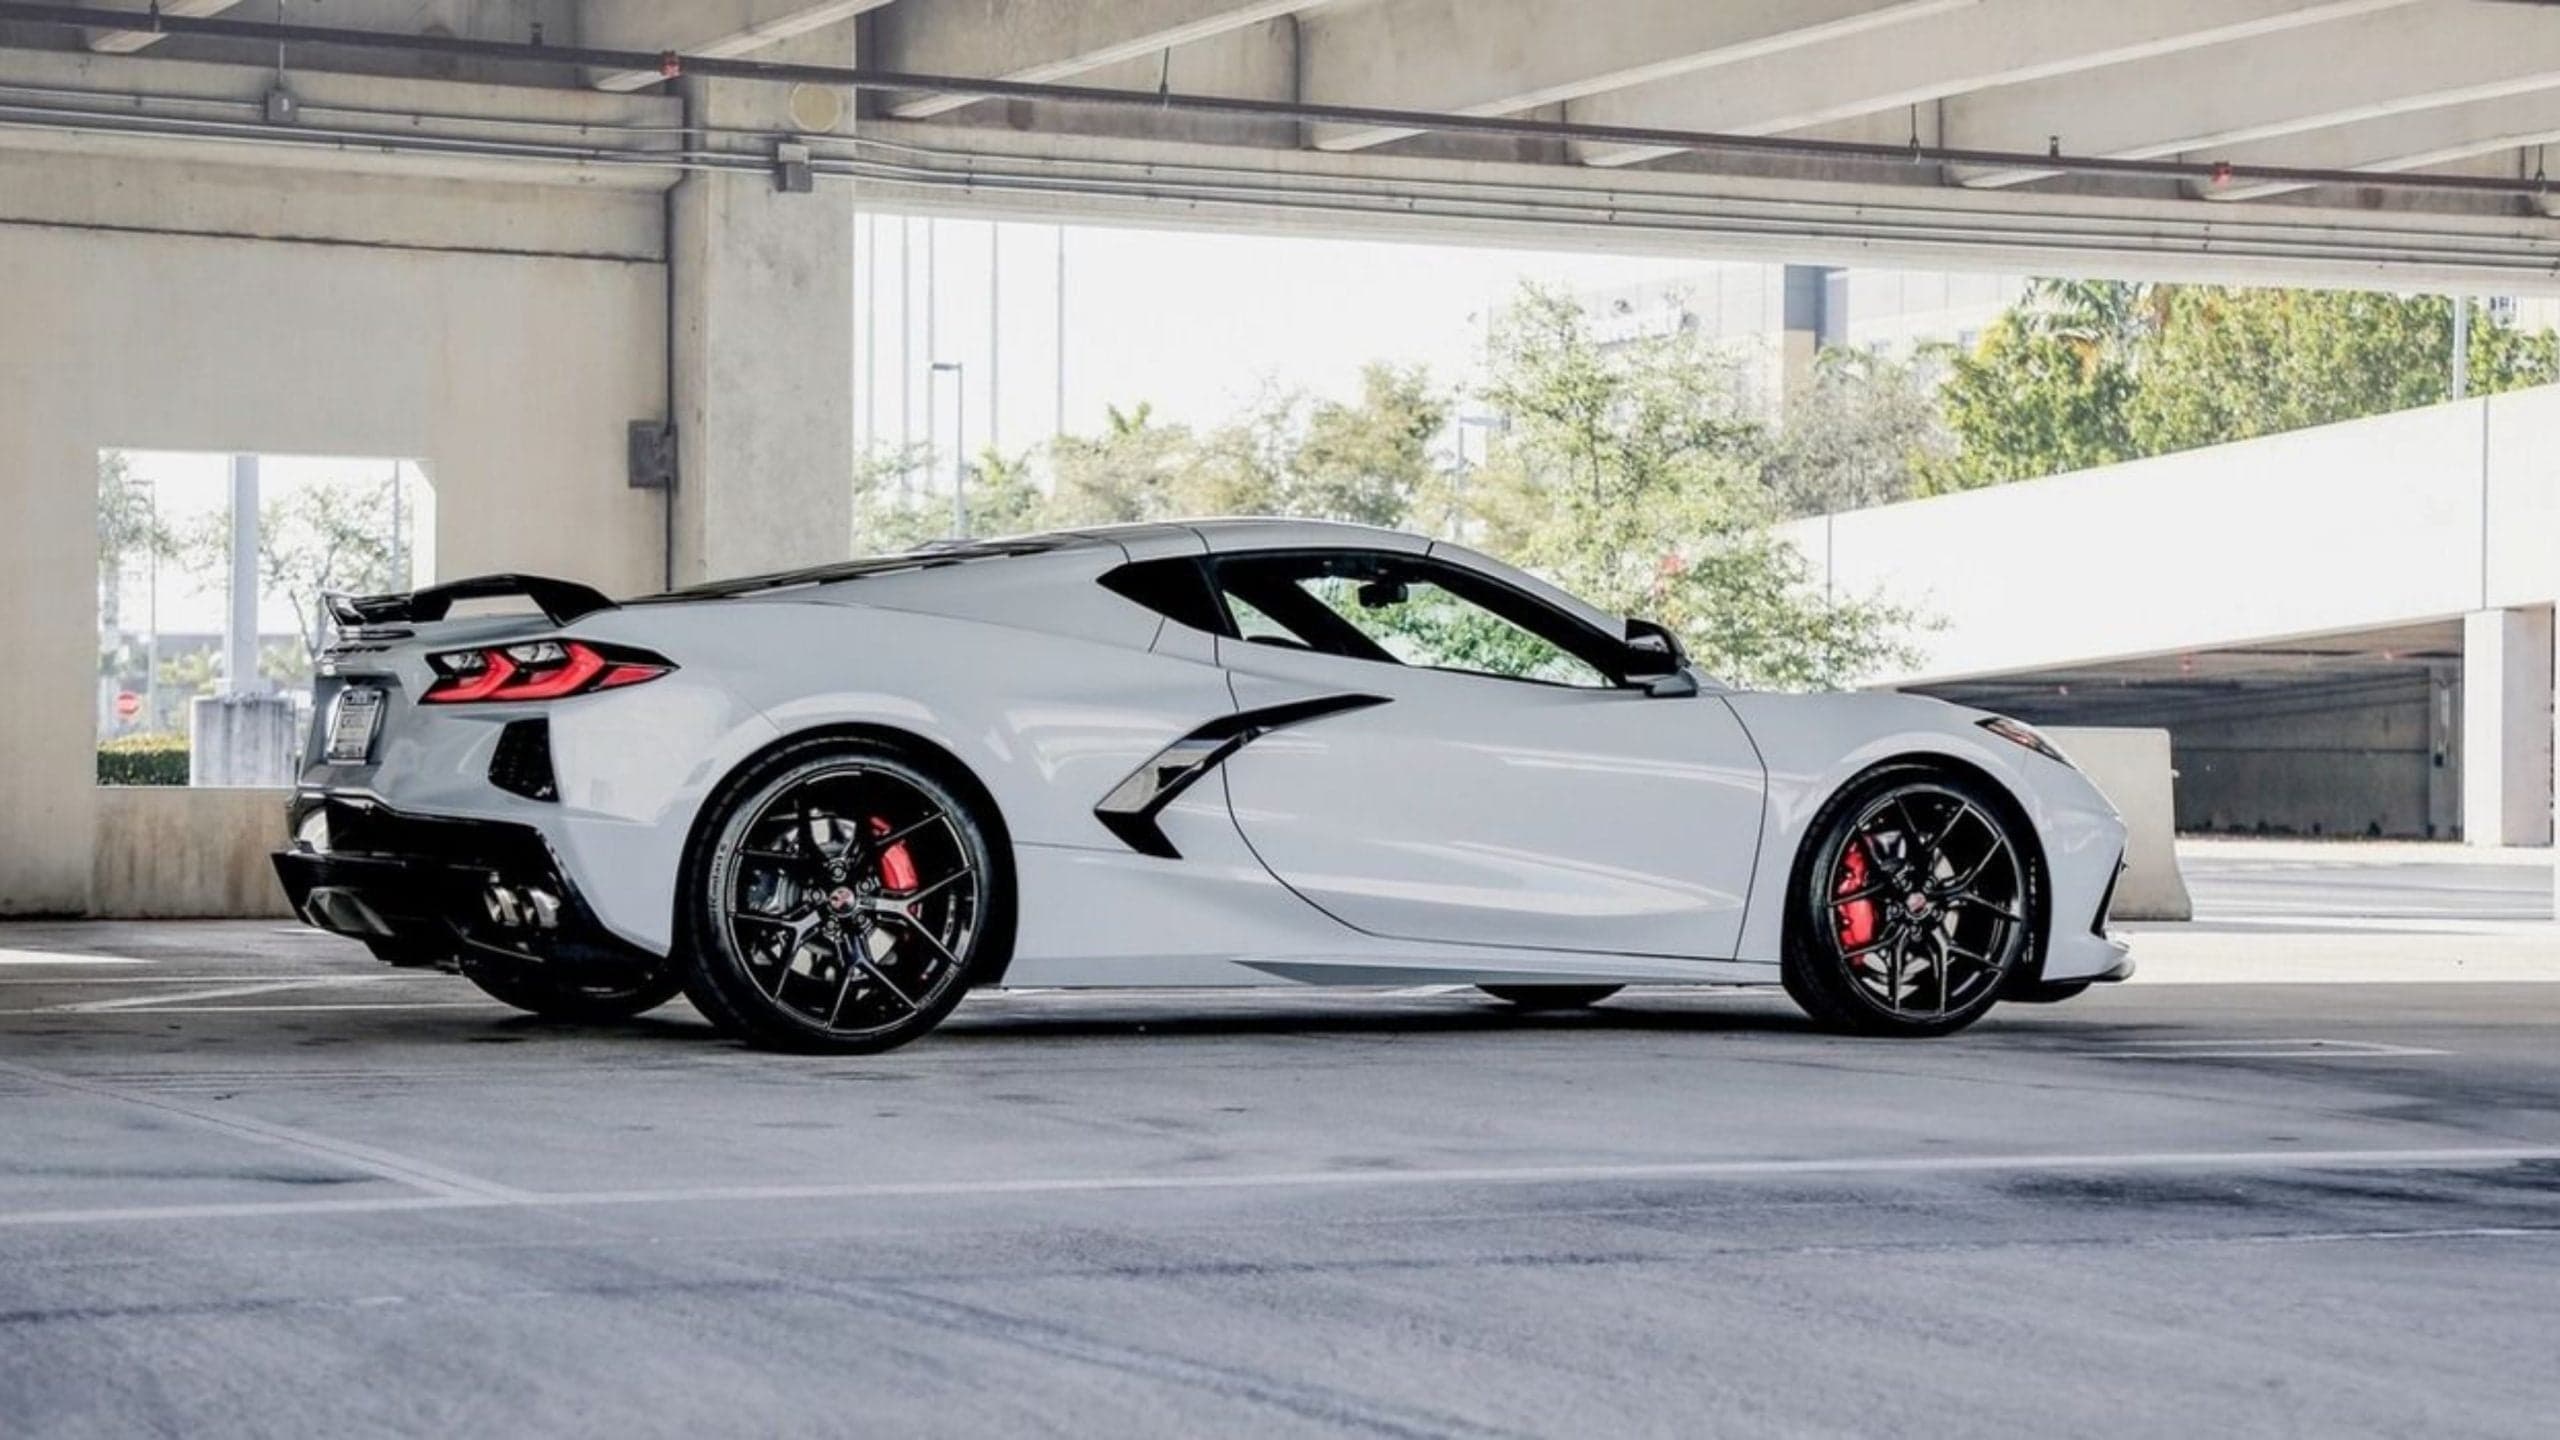 You Can Already Rent the 2020 Chevrolet Corvette C8 on Turo